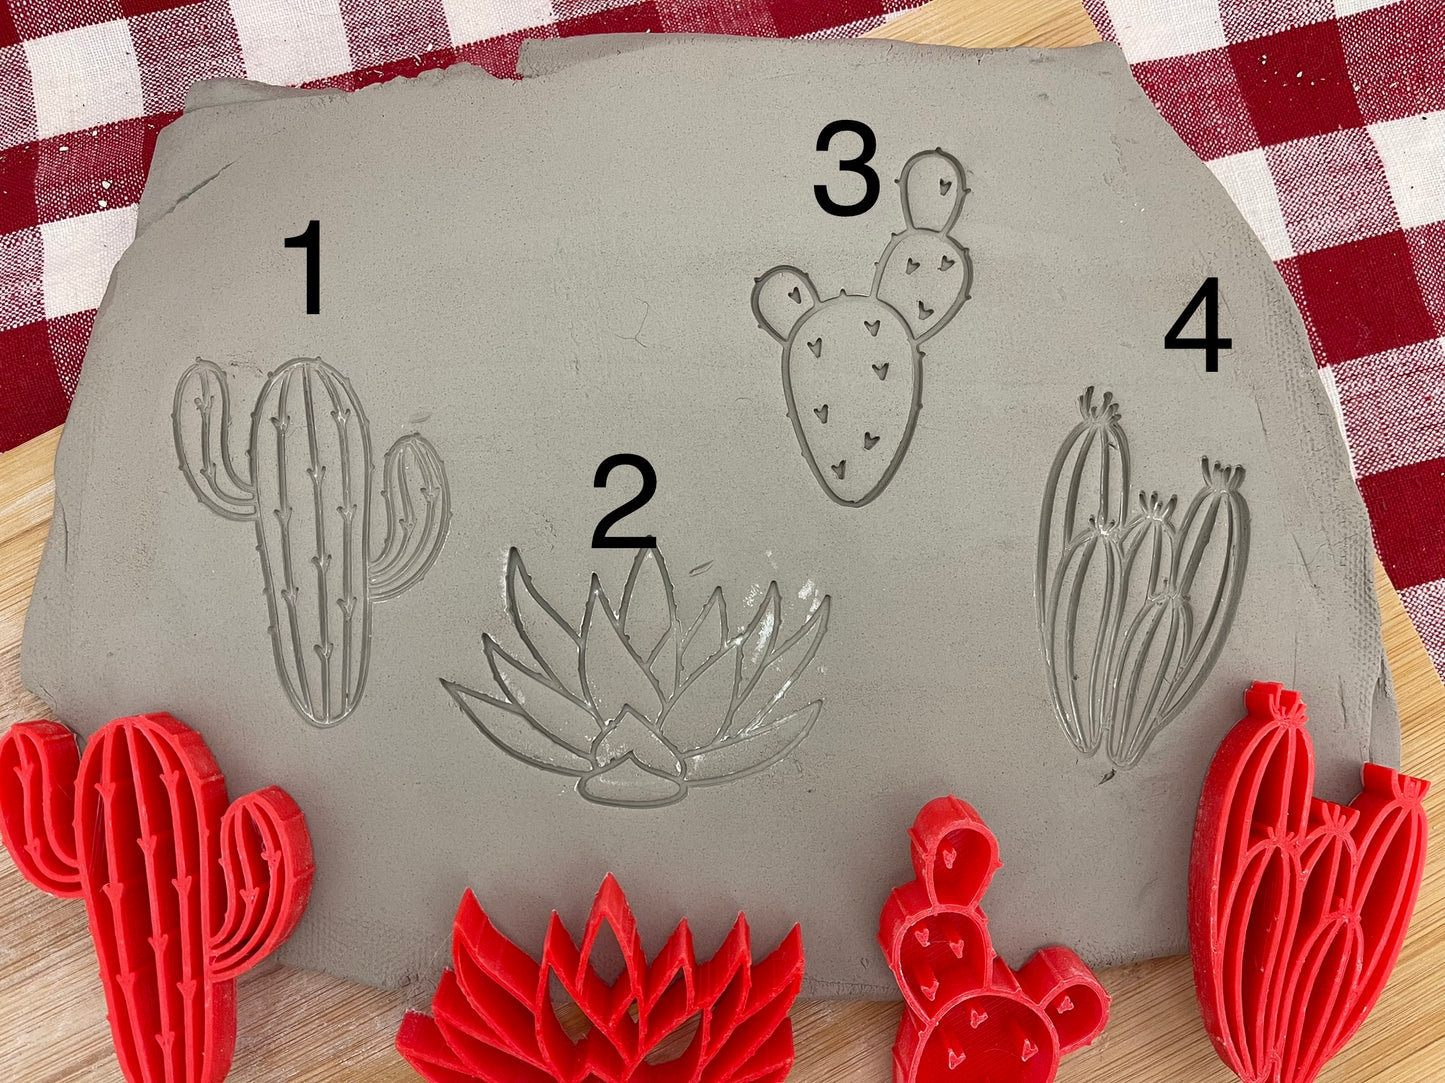 Cactus / Succulent Set Pottery Stamp - available as a set or each, plastic 3D printed, multiple sizes